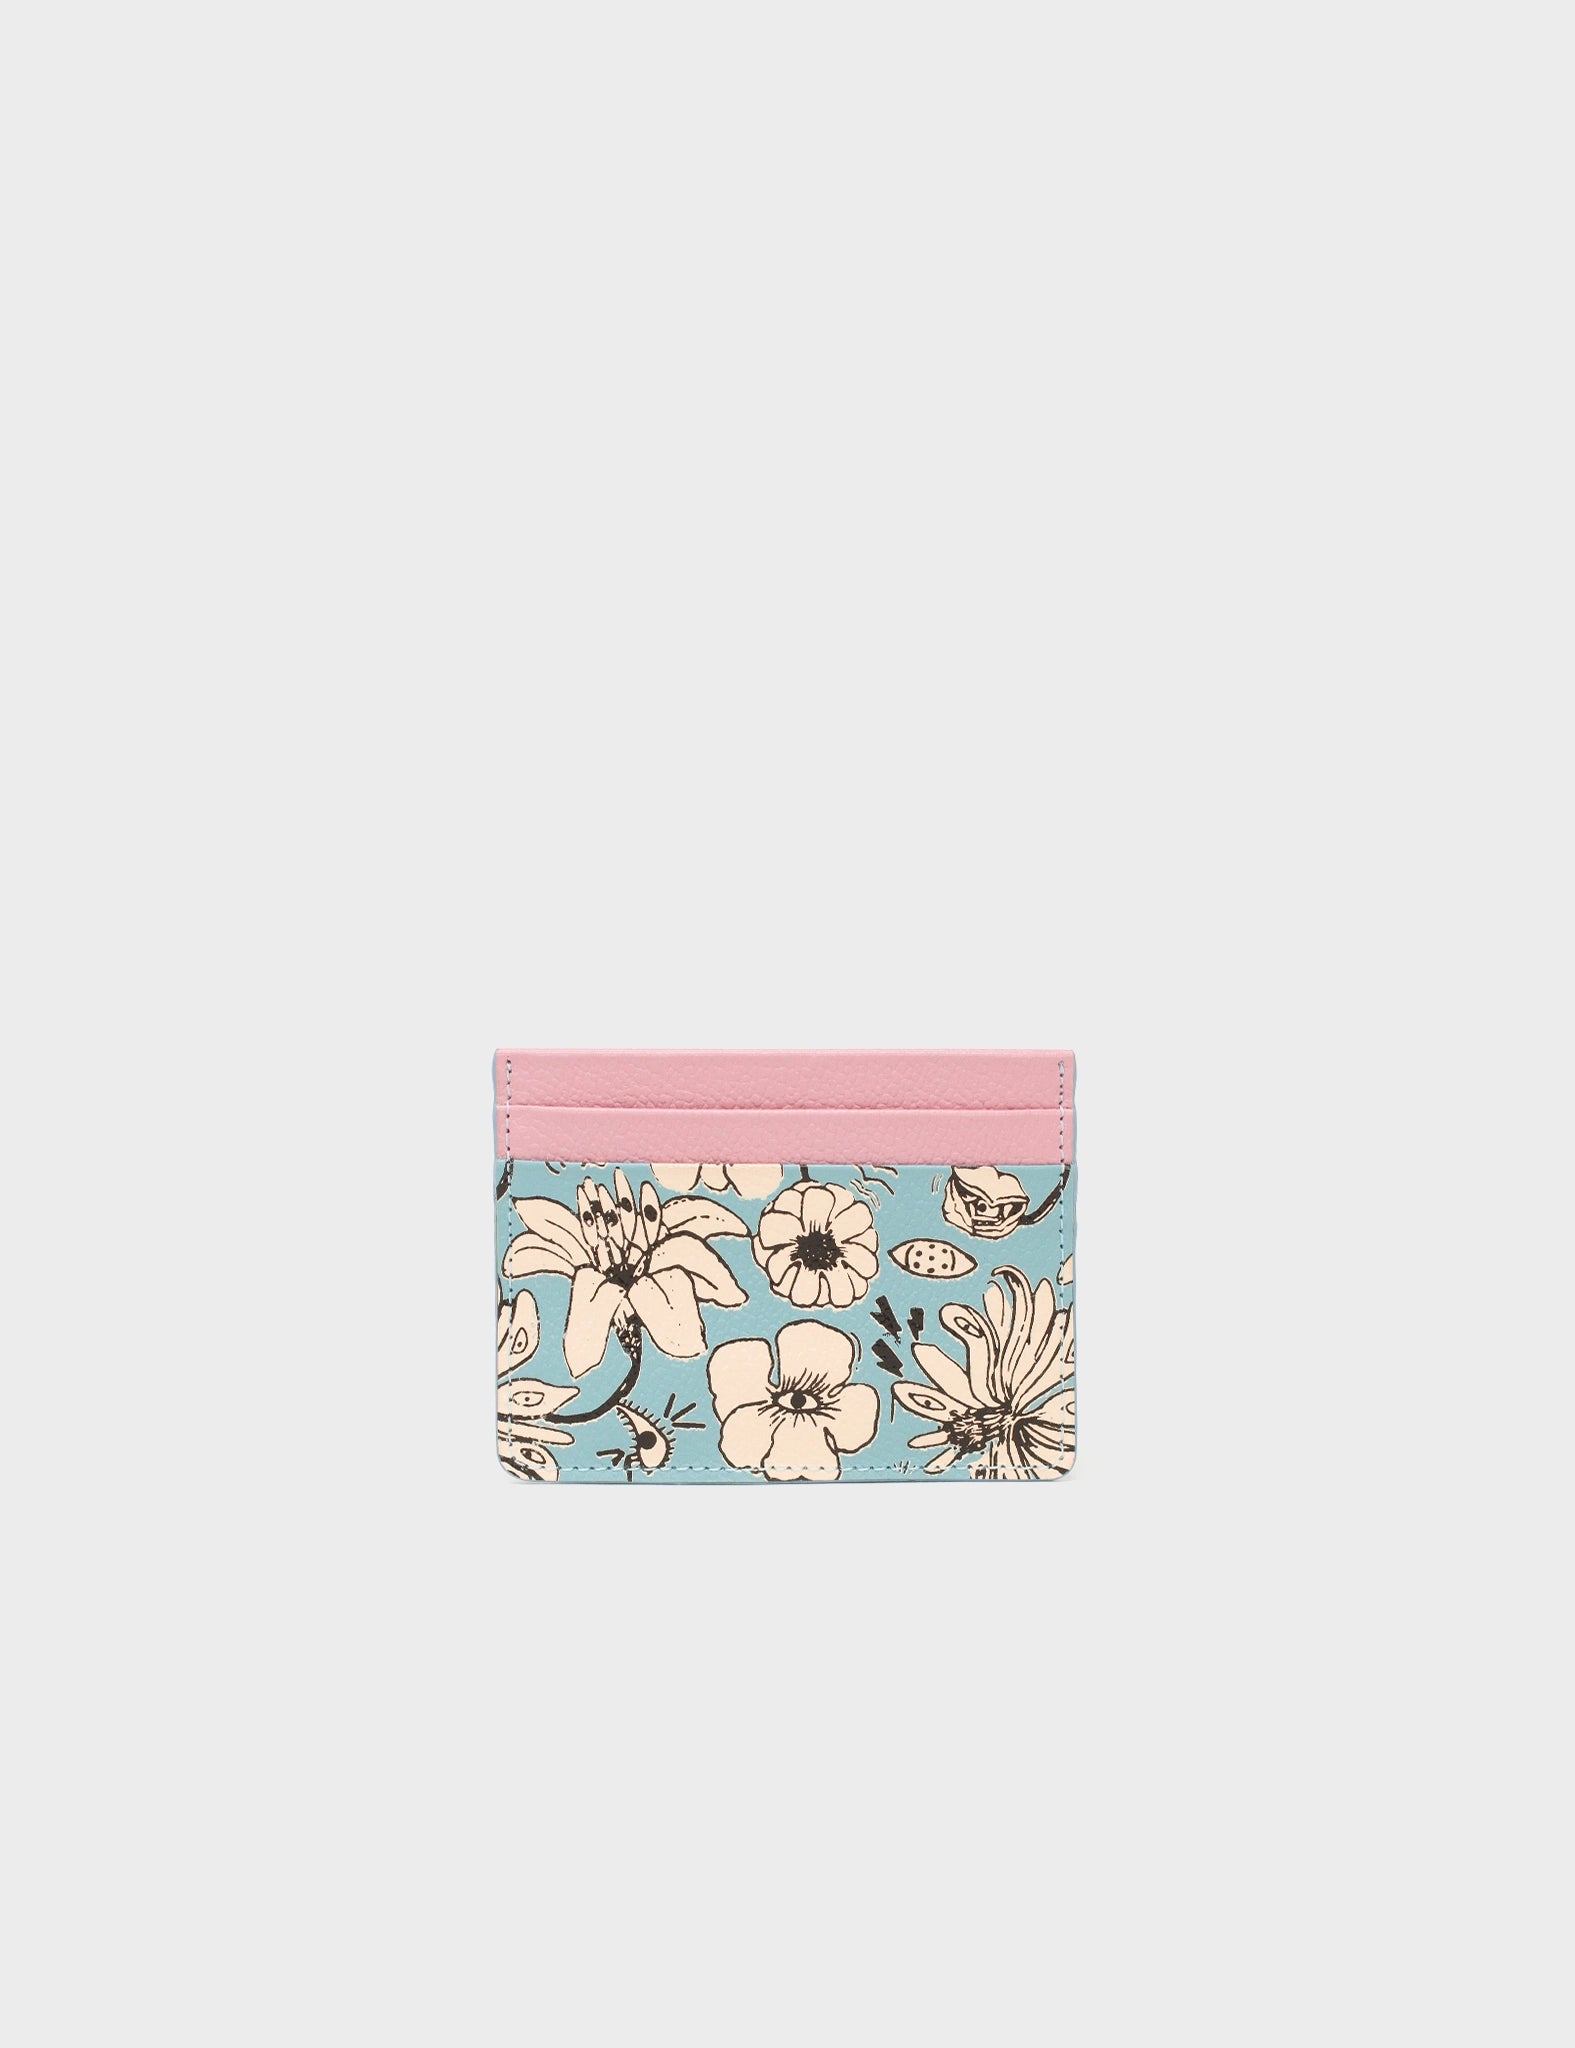 Cameo Blue And Blush Pink Leather Cardholder - Floral Print